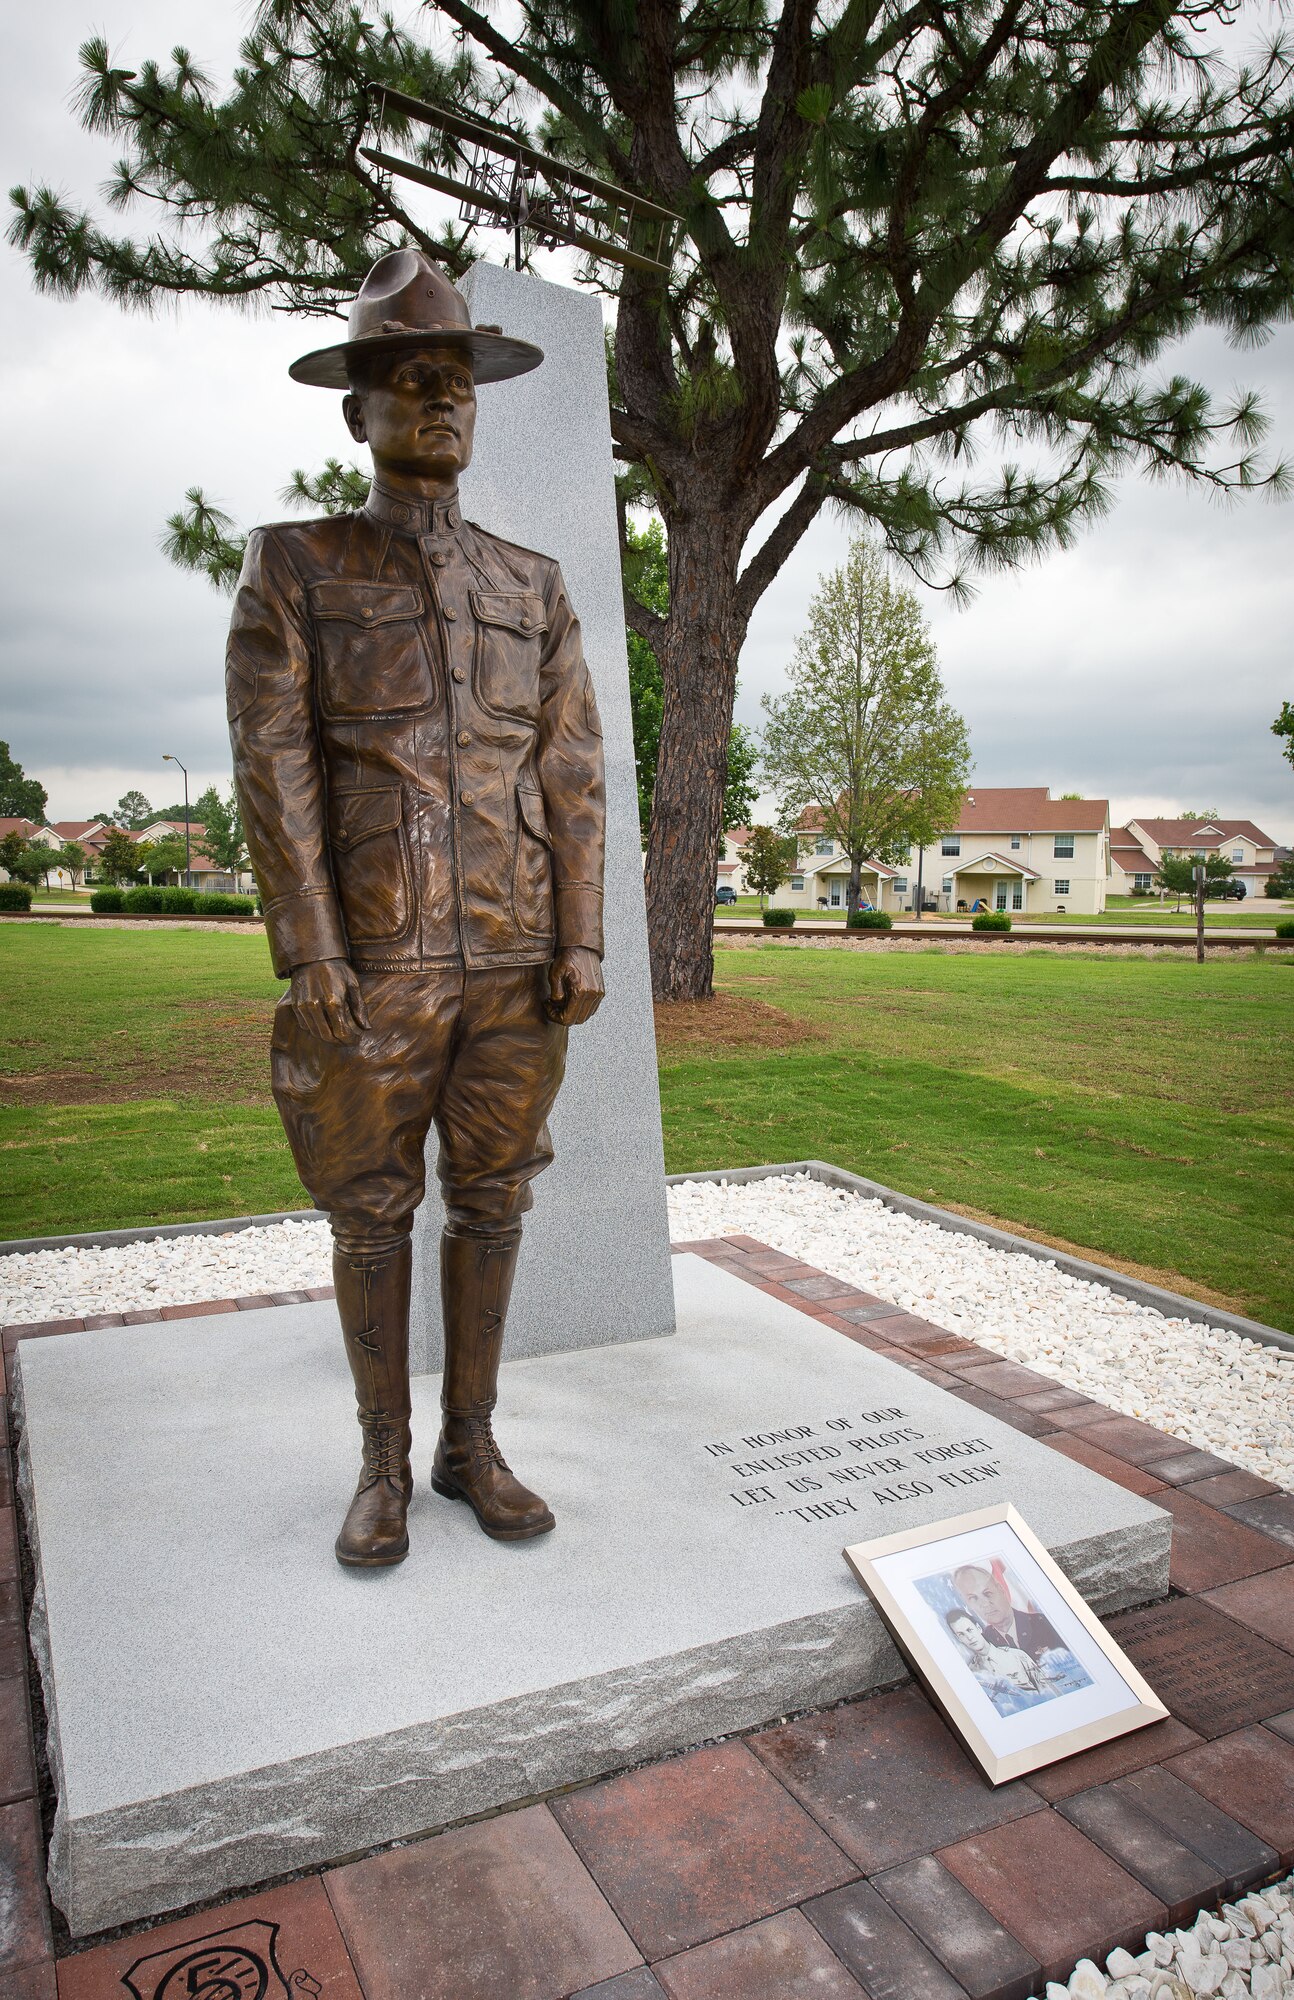 A new monument honoring the nearly 3,000 enlisted sergeant pilots who served from 1912-1957 was unveiled during a ceromony June 9, 2014, at the Enlisted Heritage Hall at Maxwell-Gunter Air Force Base. The monument depicts Cpl. Vernon L. Burge, the first enlisted pilot in military aviation, and recognizes the acomplishments of the enlisted fliers who came after him. (U.S. Air Force photo by Donna Burnett)